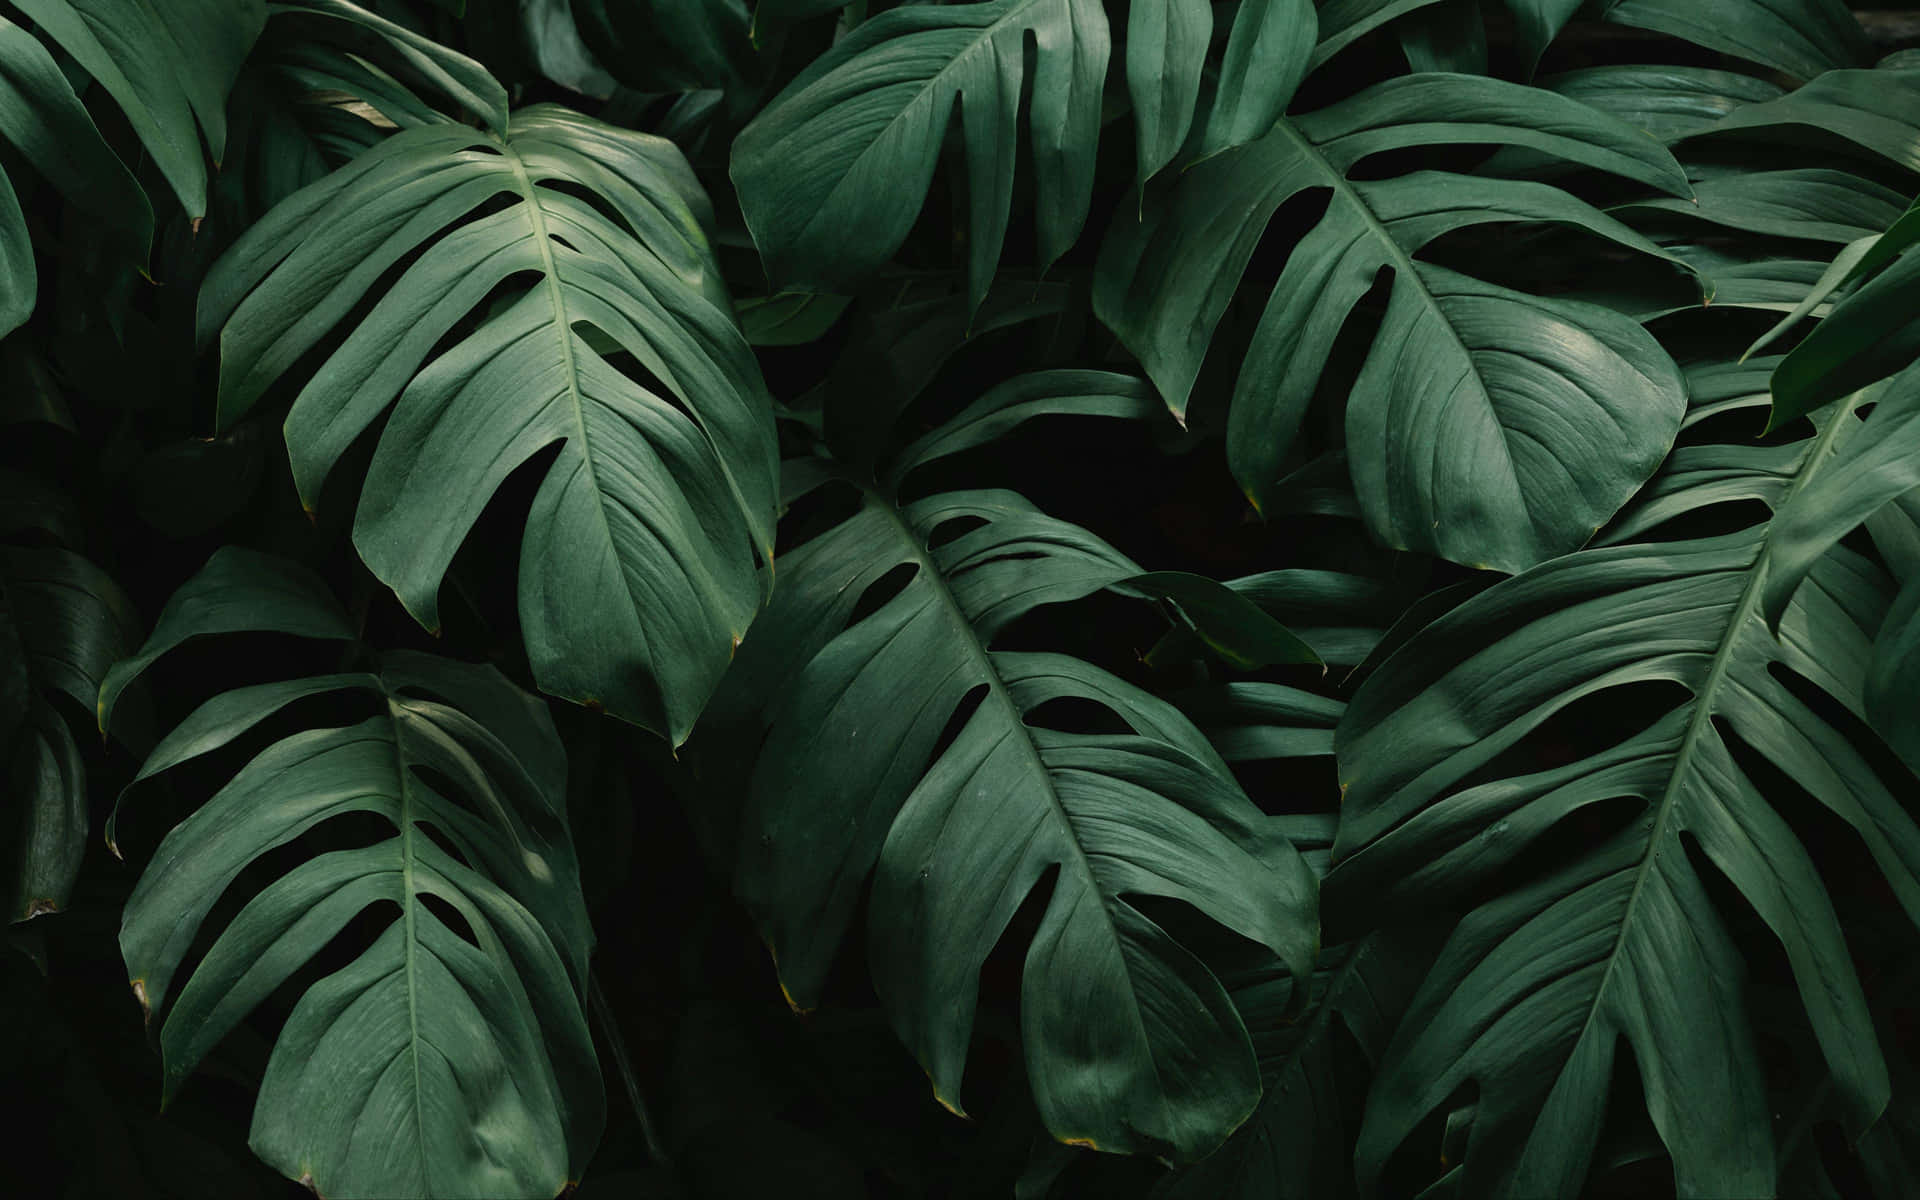 Bring Nature To Your Desktop With This Elegant Plant Aesthetic Background